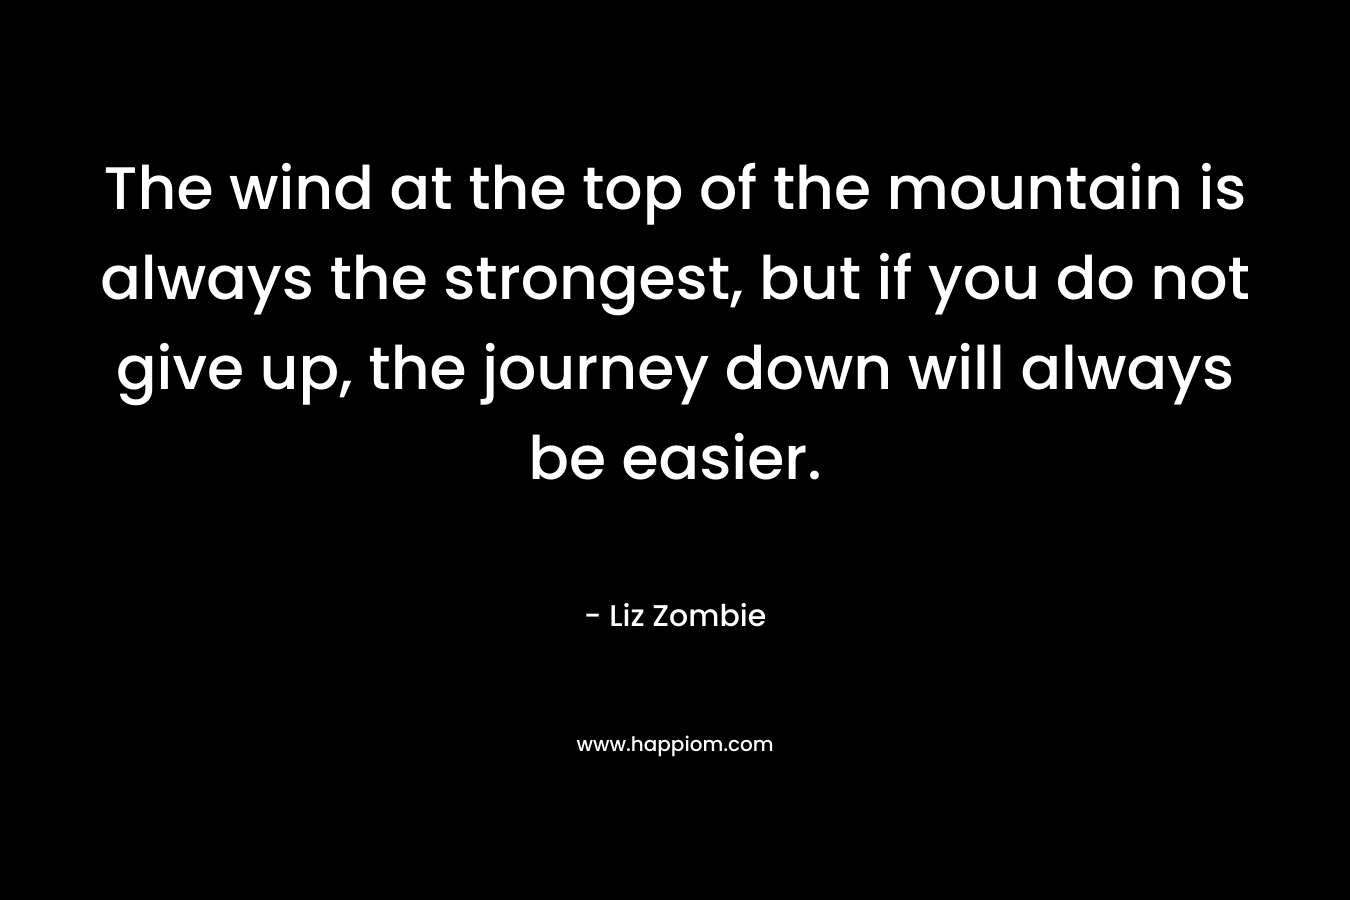 The wind at the top of the mountain is always the strongest, but if you do not give up, the journey down will always be easier. – Liz Zombie